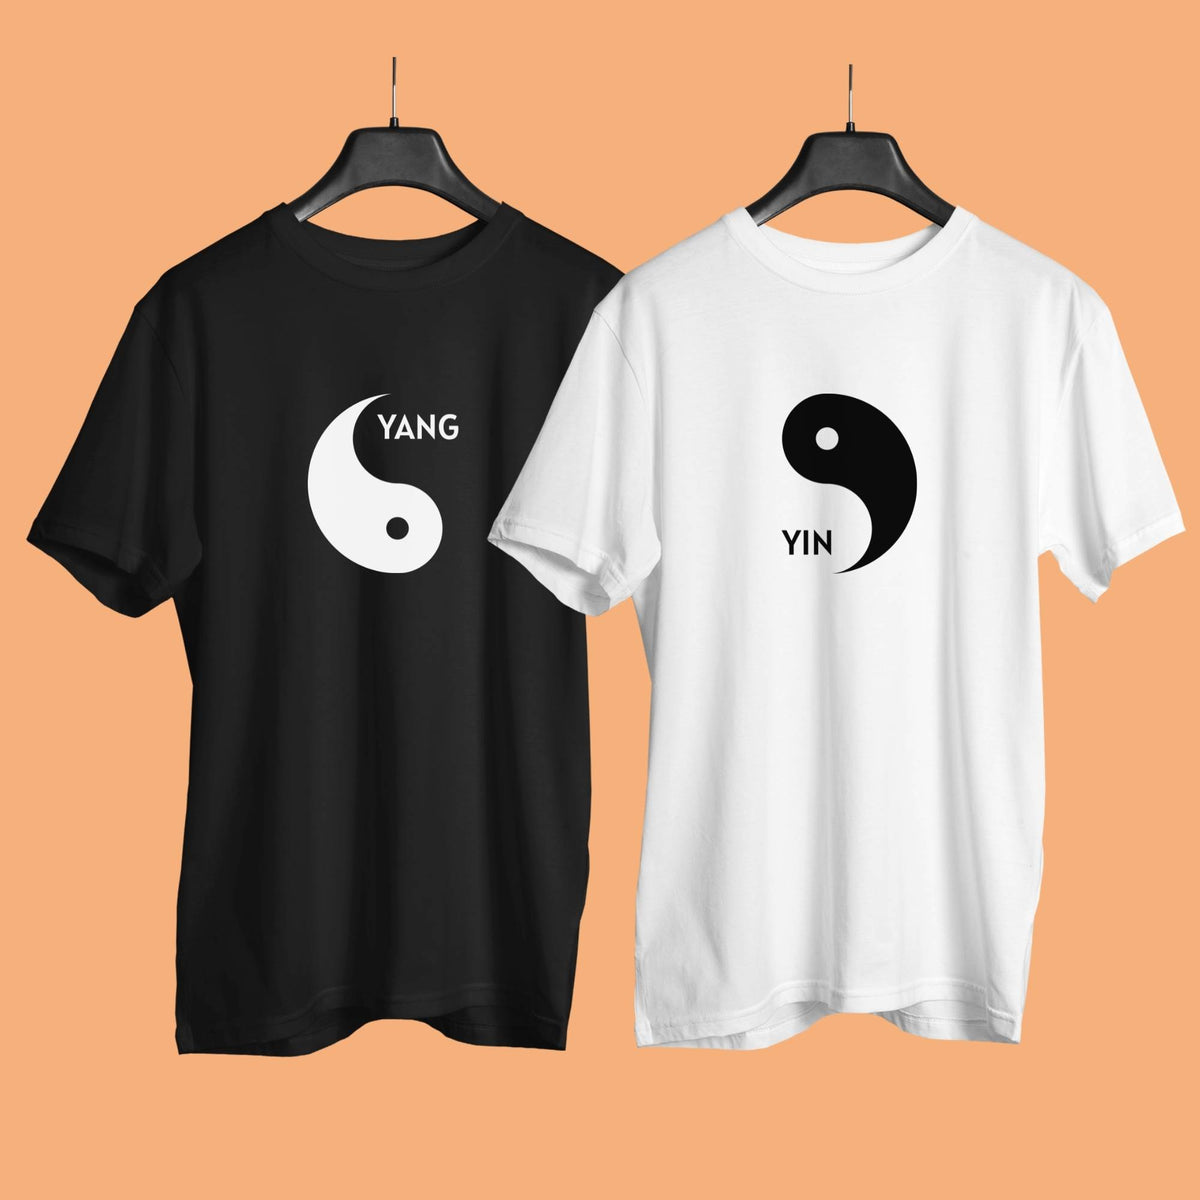 Yang-yin-couple-t-shirt-with-front-and-back-print-customizable-black-and-white-color-premium-quality-gogirgit-on-hangers